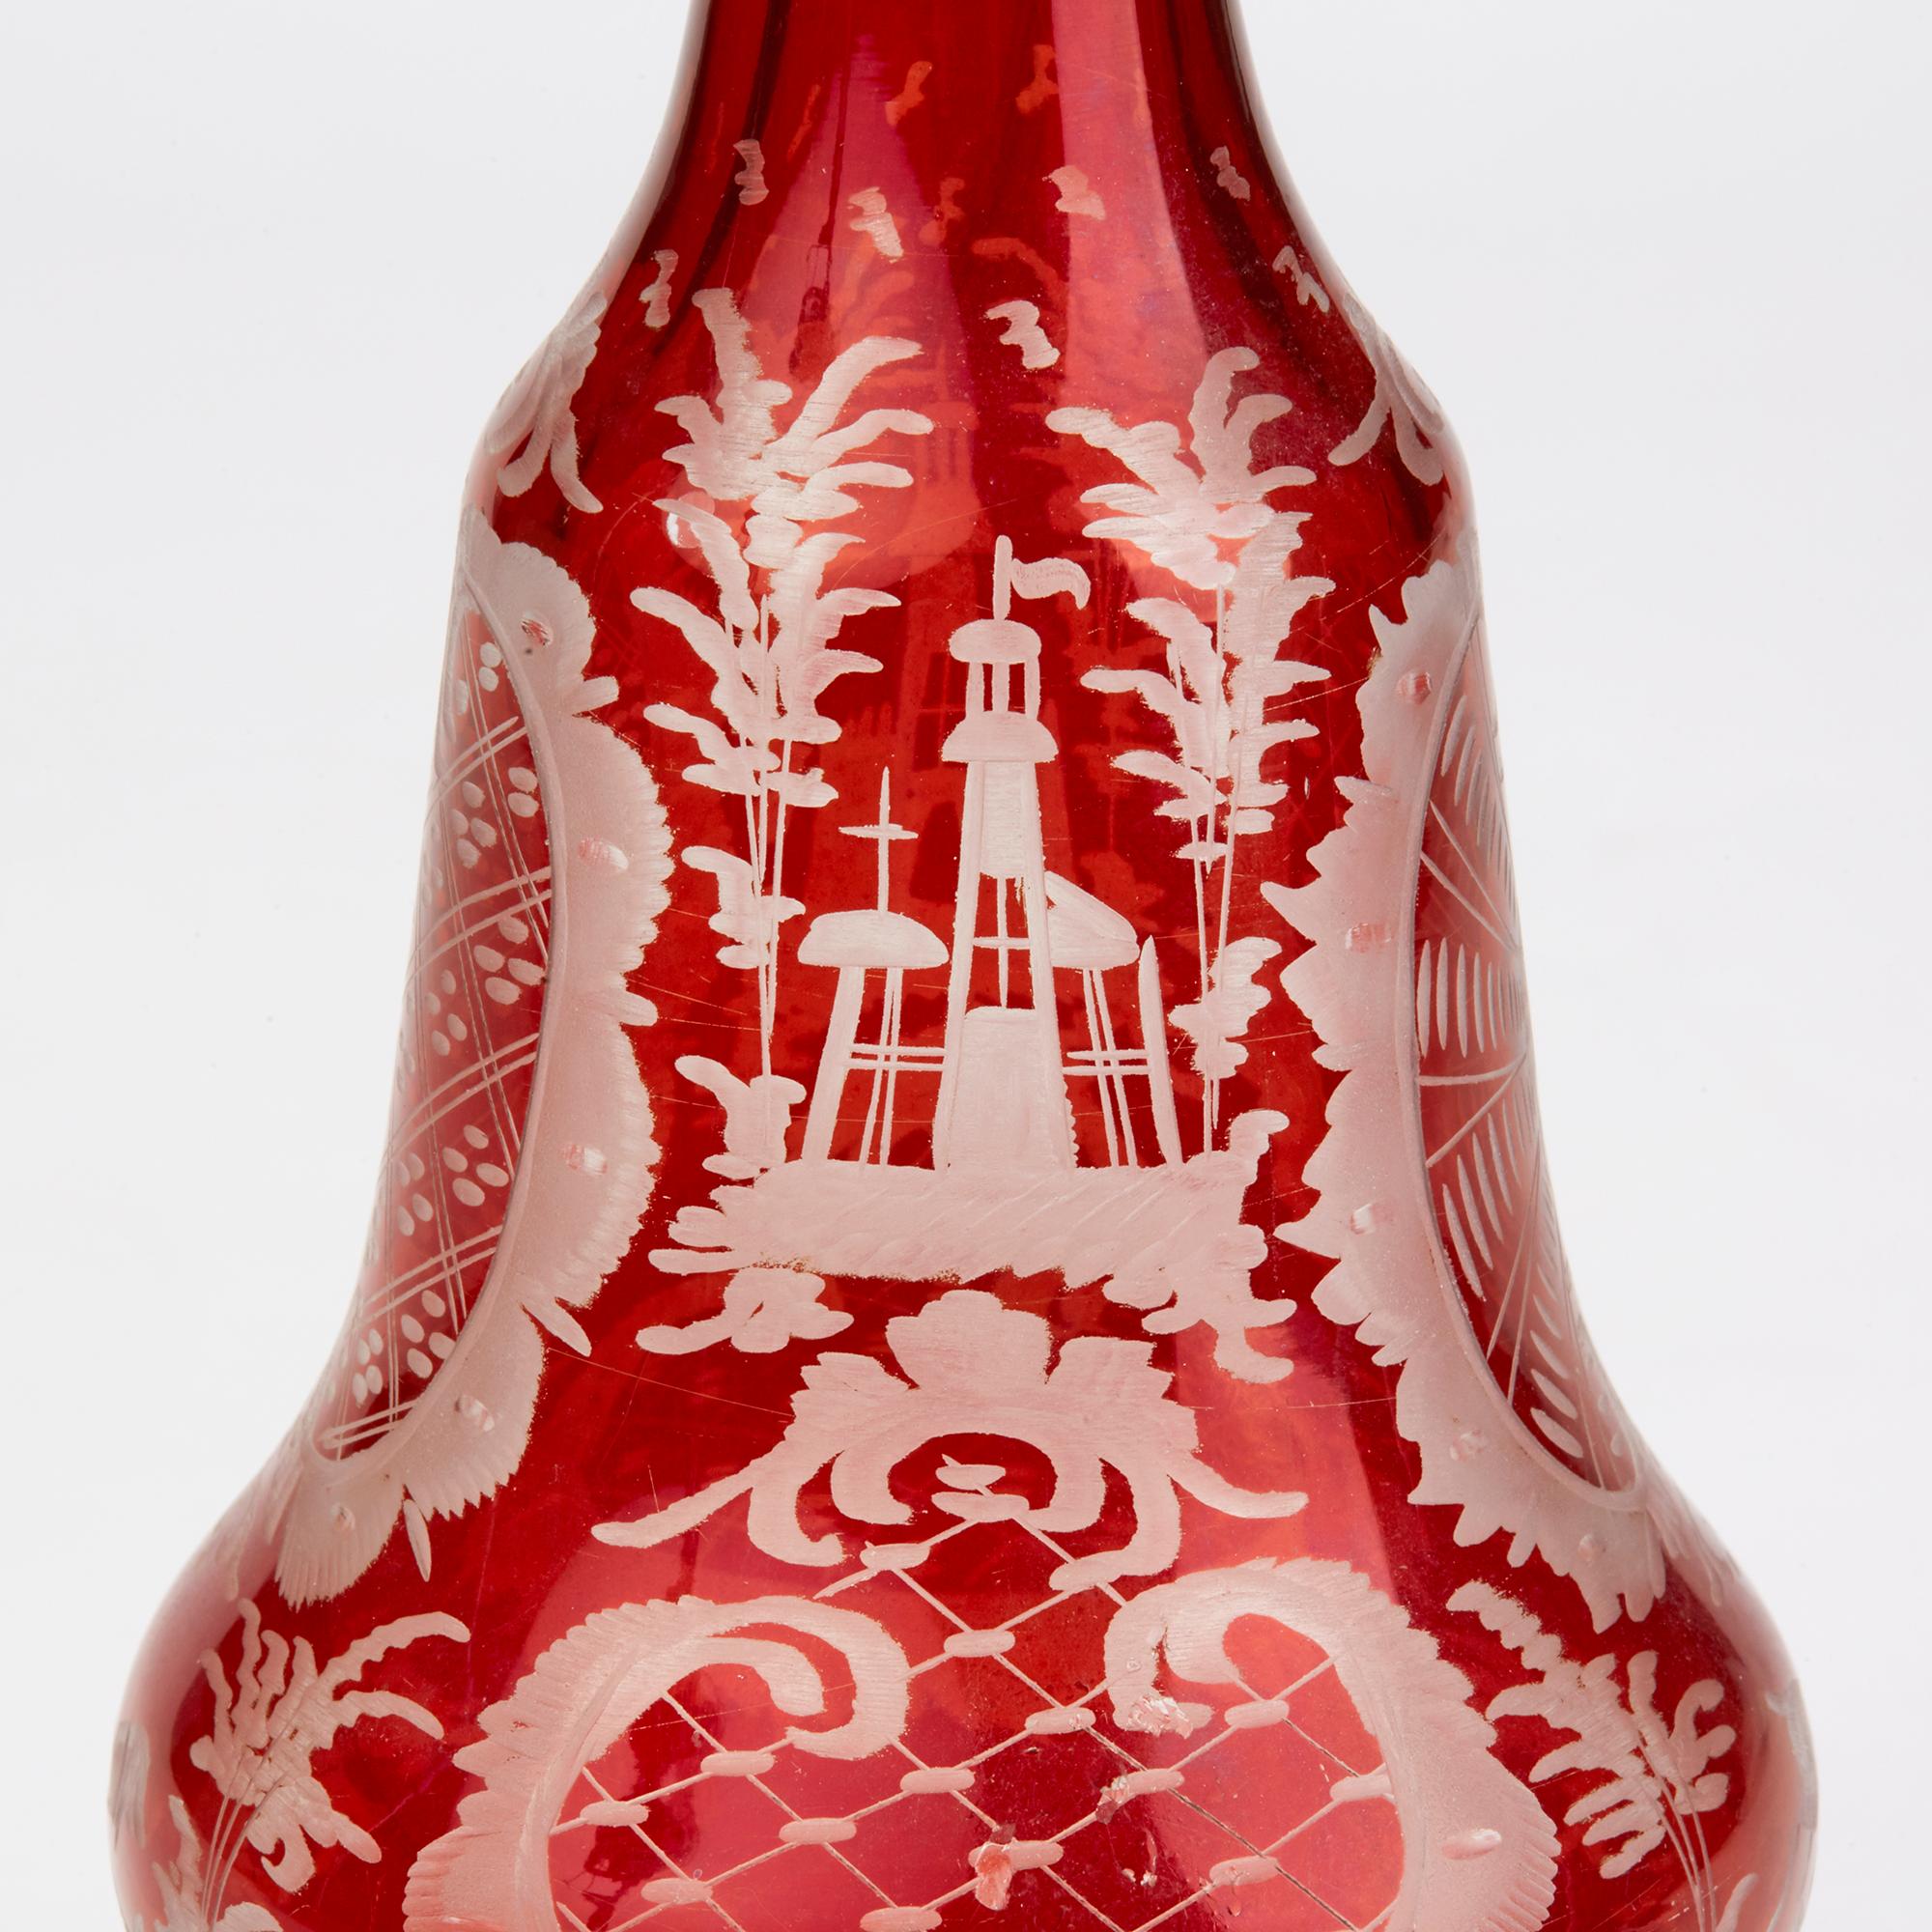 A fine pair antique Bohemian ruby flashed glass decanters and stoppers each engraved with a dog, running deer and various buildings set within landscapes and set amidst patterned designs with engraved scroll work around the foot. Both have original